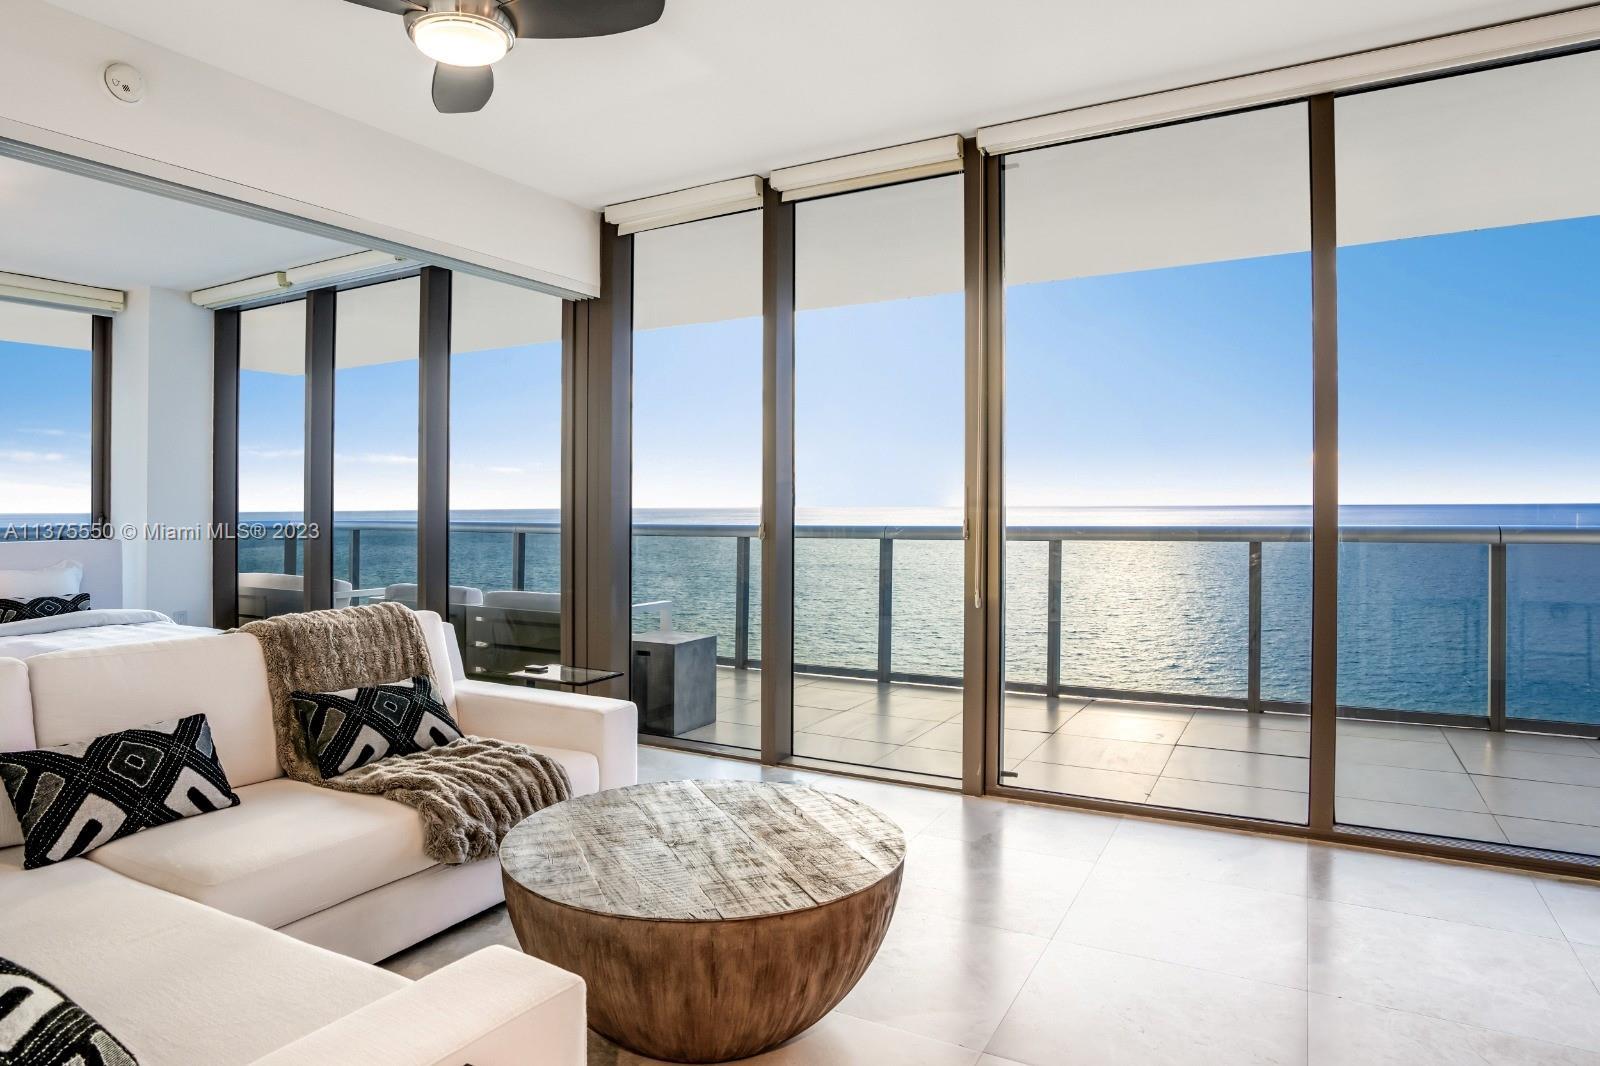 From breathtaking ocean views to unmatched elegance, Residence 2001 at MEi Miami Beach is the perfec